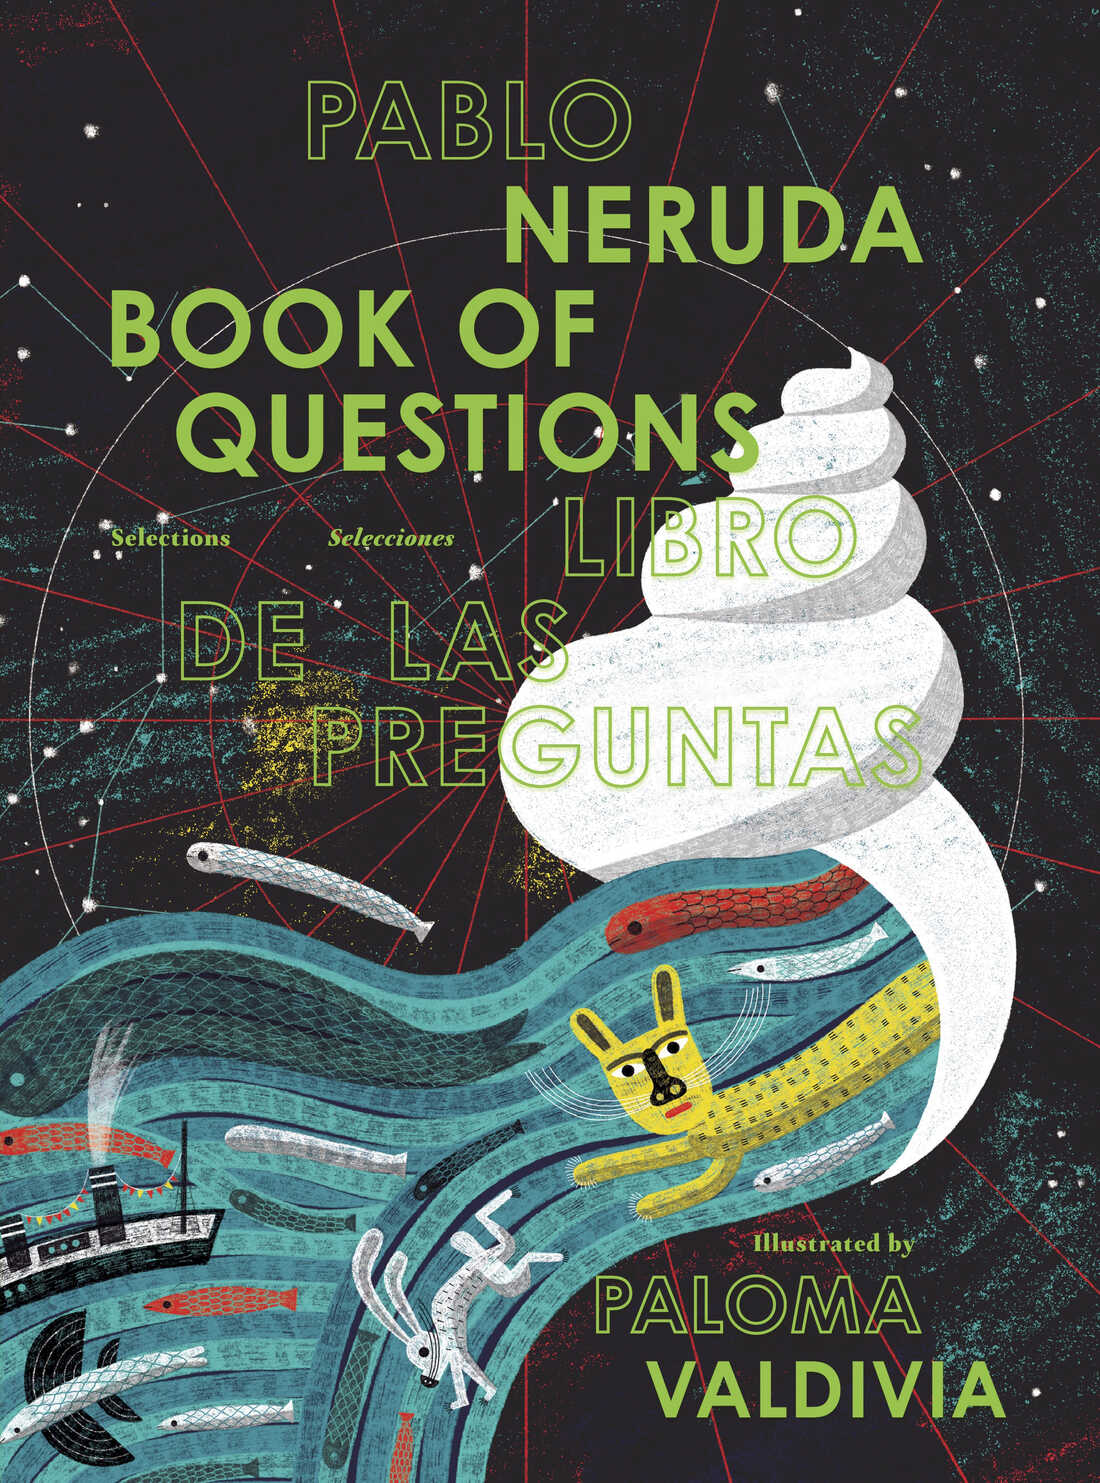 Cover for Book of Questions featuring an illustration of a large spiral seashell with water, ships, and animals including rabbits and fish flowing out of it. It appears to be floating in space and there are decorative red lines radiating out of the center of the cover. The book's title and authors are displayed in green and alternate between being filled our just outlined.